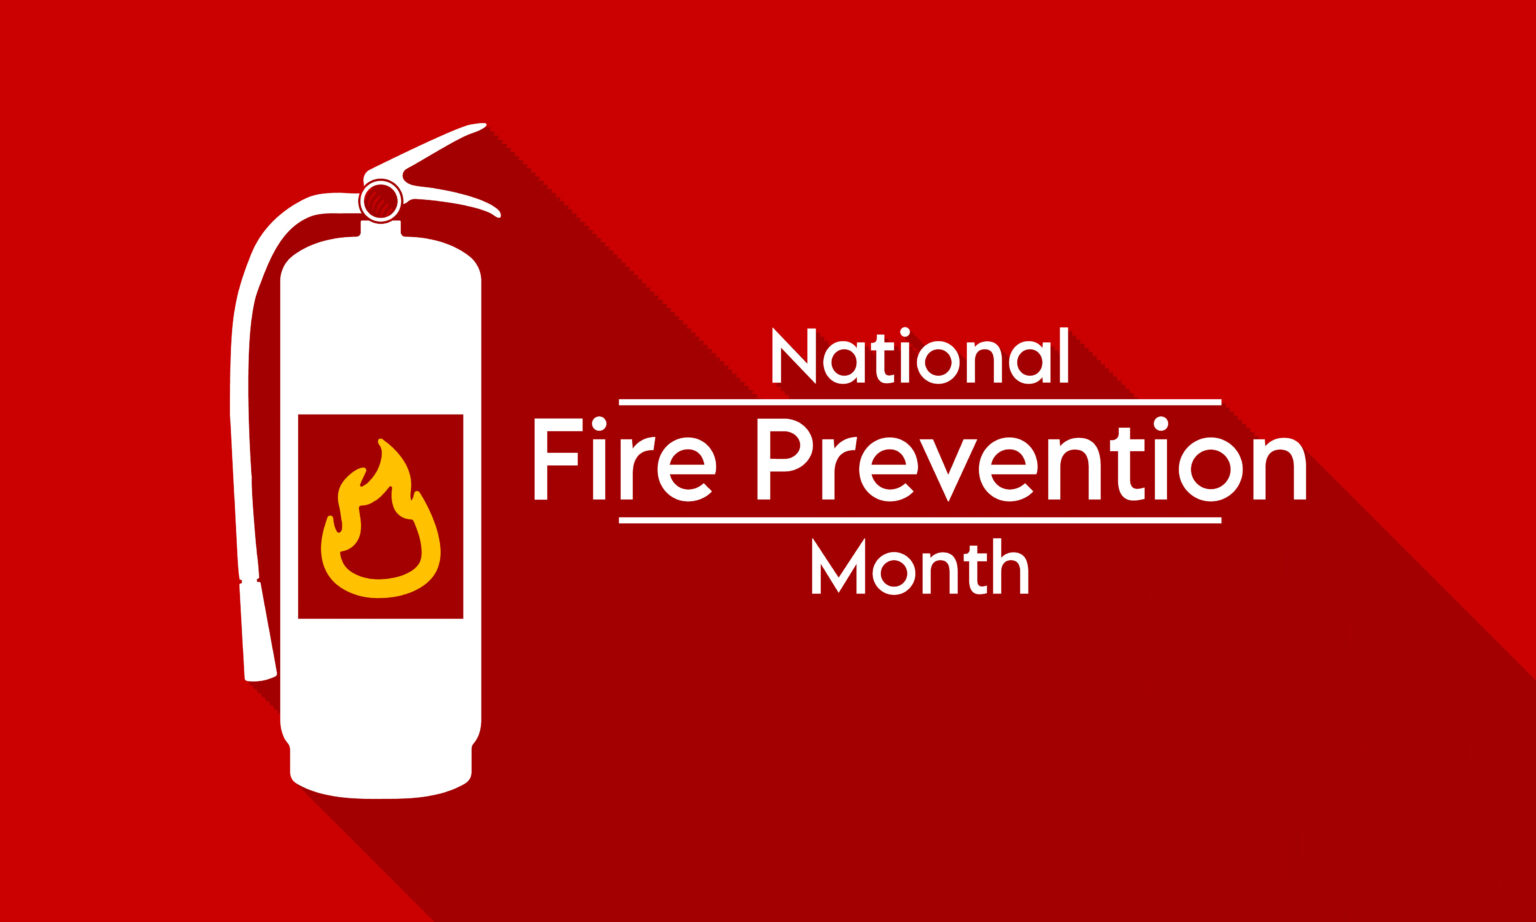 hospital-national-fire-safety-month-resources-gloshield